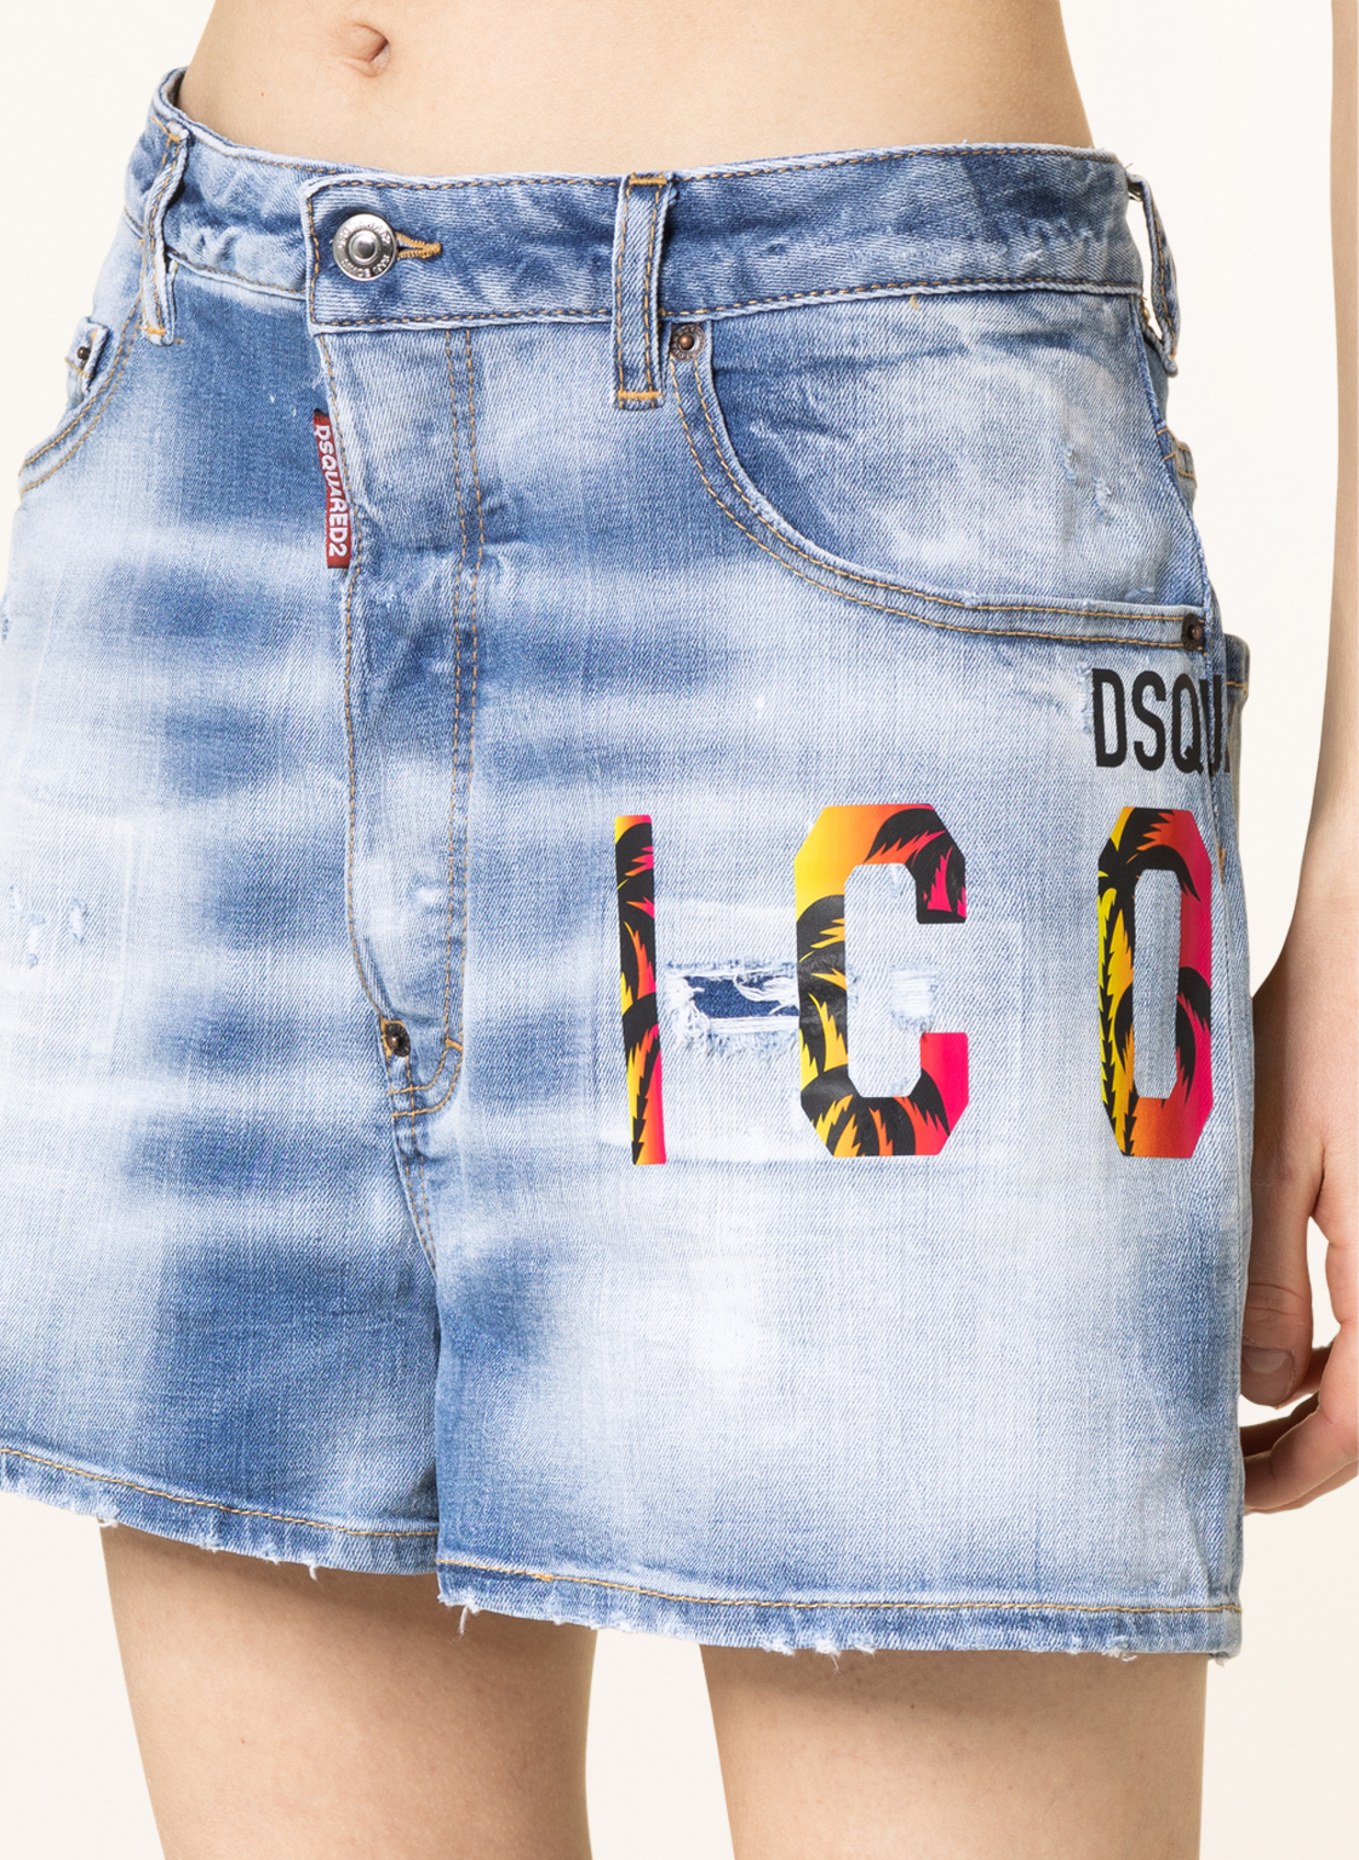 DSQUARED2 Jeansshorts SUNSET BAGGY, Farbe: 470 BLUE NAVY (Bild 5)